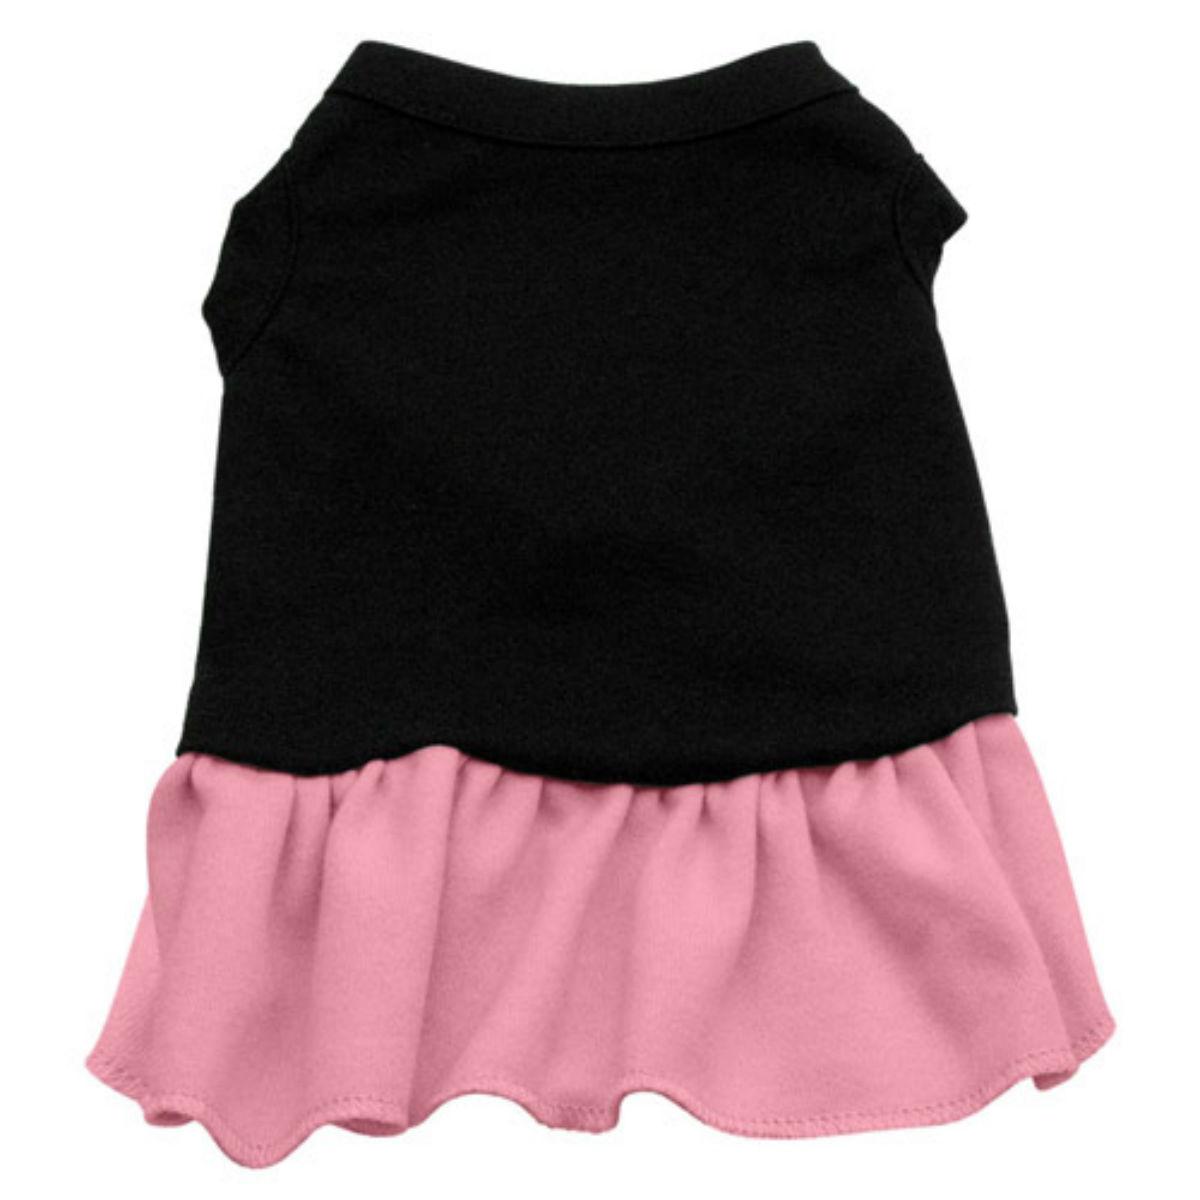 Plain Two Toned Dog and Cat Dress - Black with Light Pink Skirt